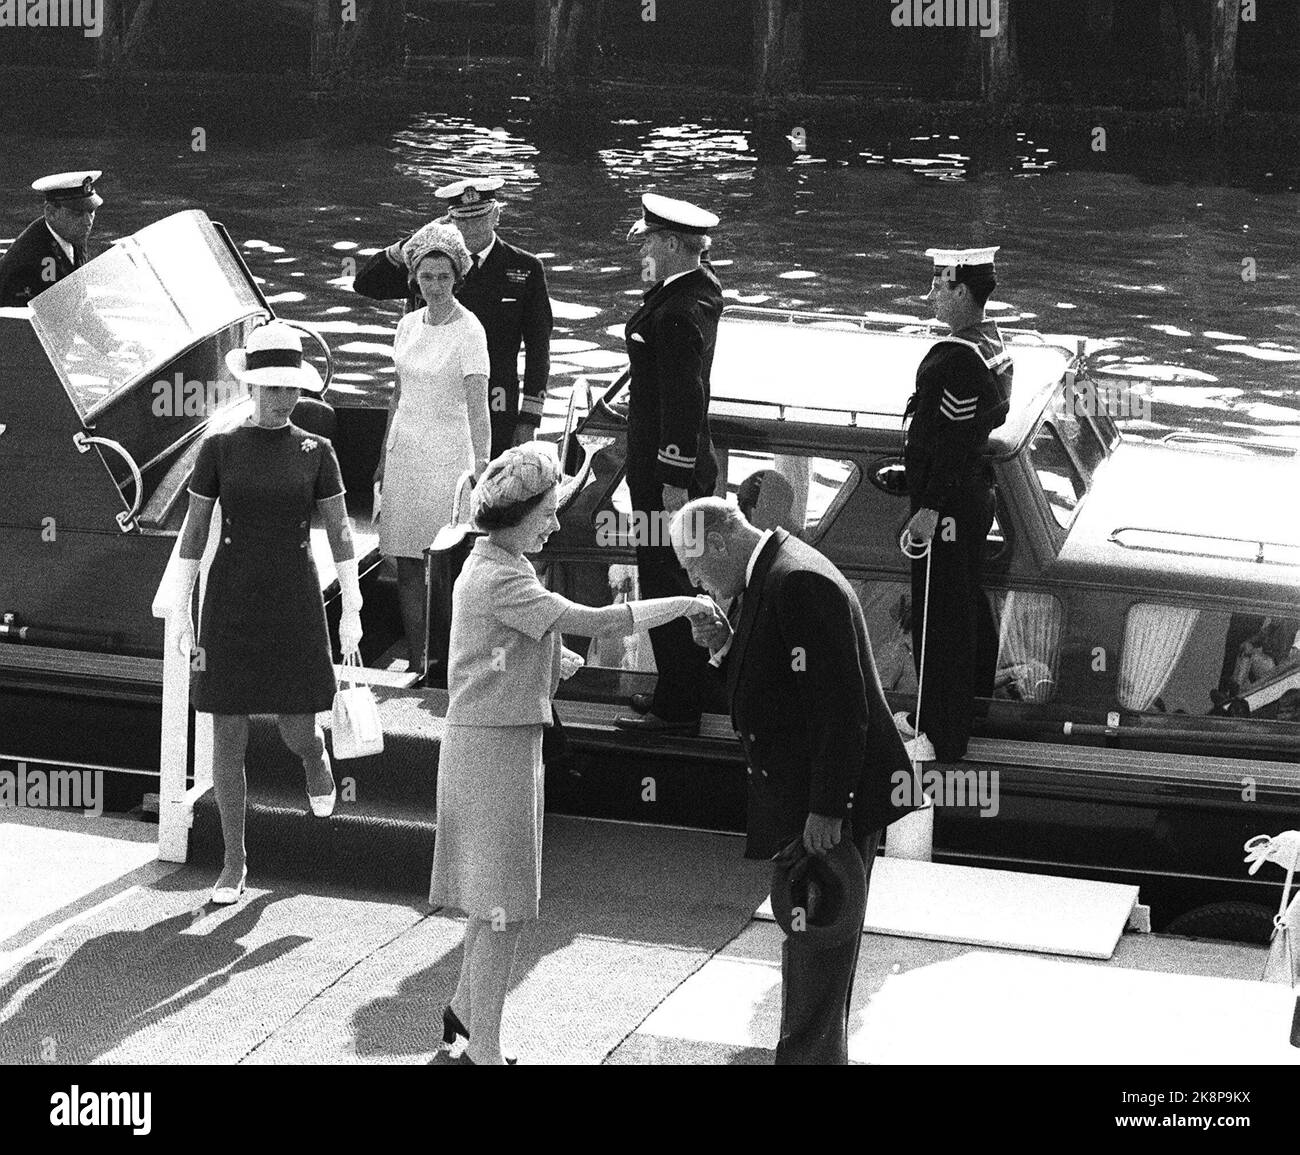 Molde 19690809. Queen Elizabeth II of England visiting Norway with her family. King Olav welcomes the royals to Molde and kisses the queen on hand. Ntb archive / ntb Stock Photo